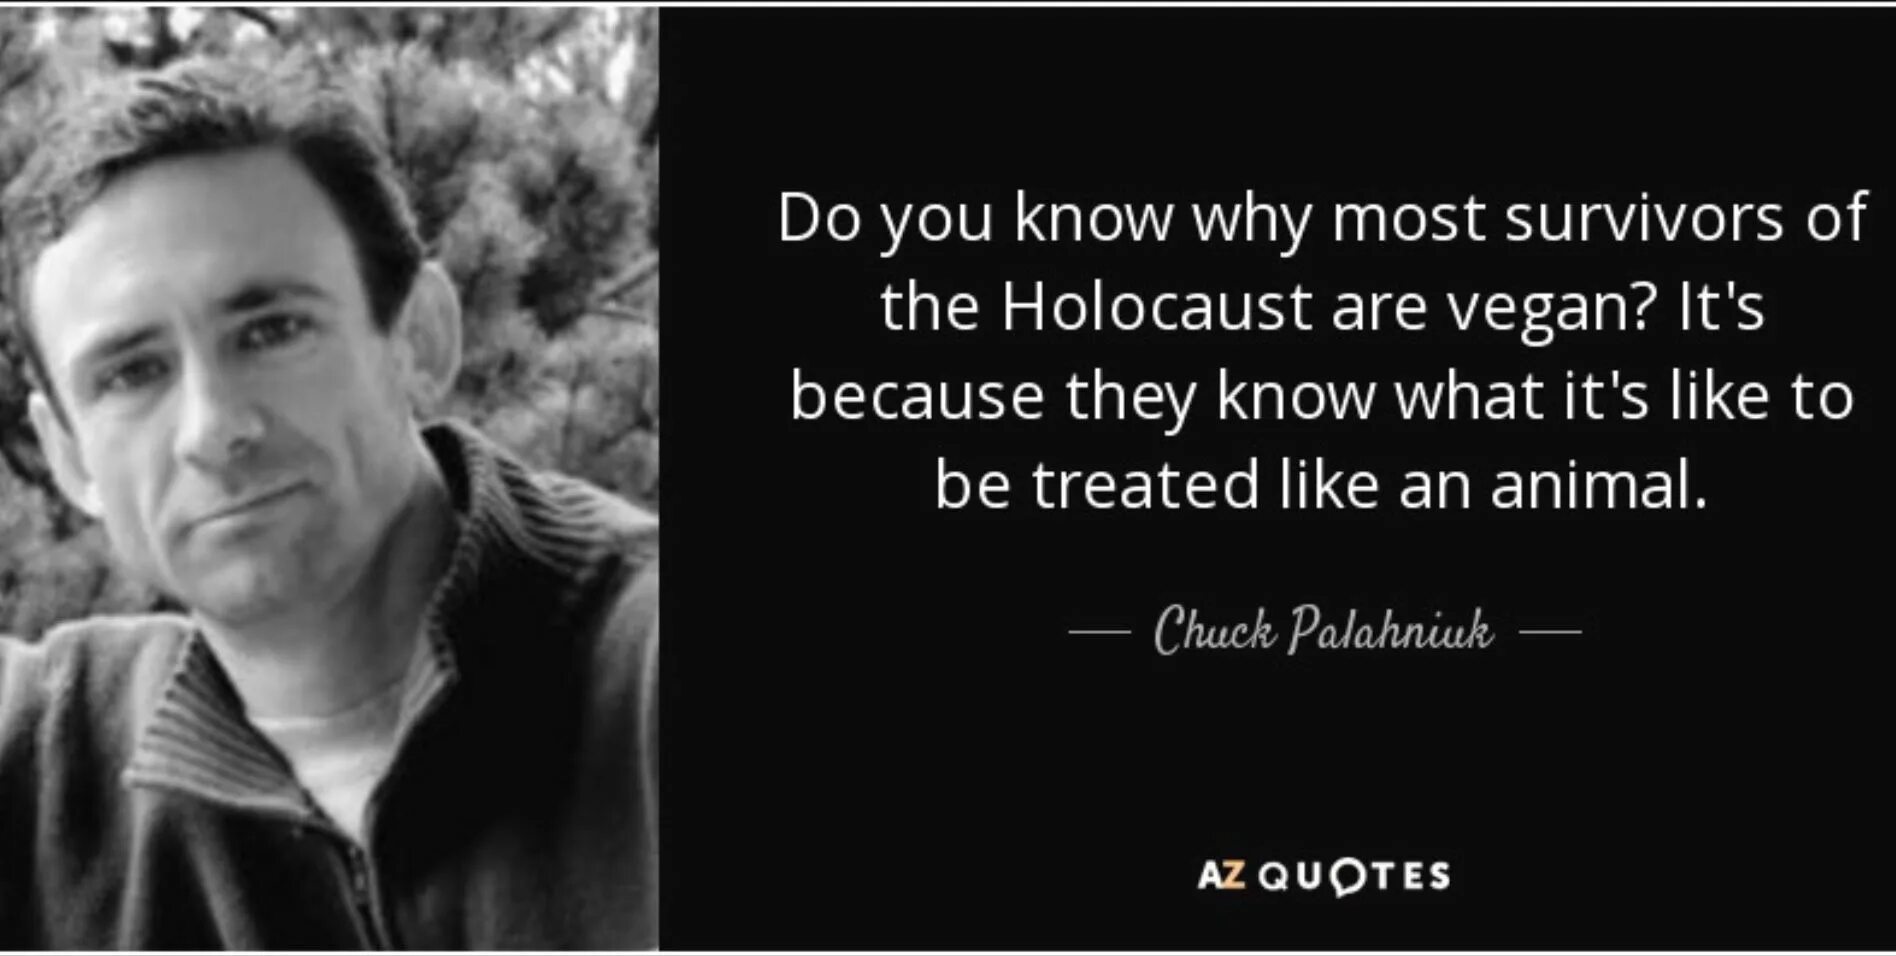 Just he leave has. Palahniuk Chuck "tell-all". A person who thinks all the time Мем. Do not resurrect исполнитель. Quotes from great people.